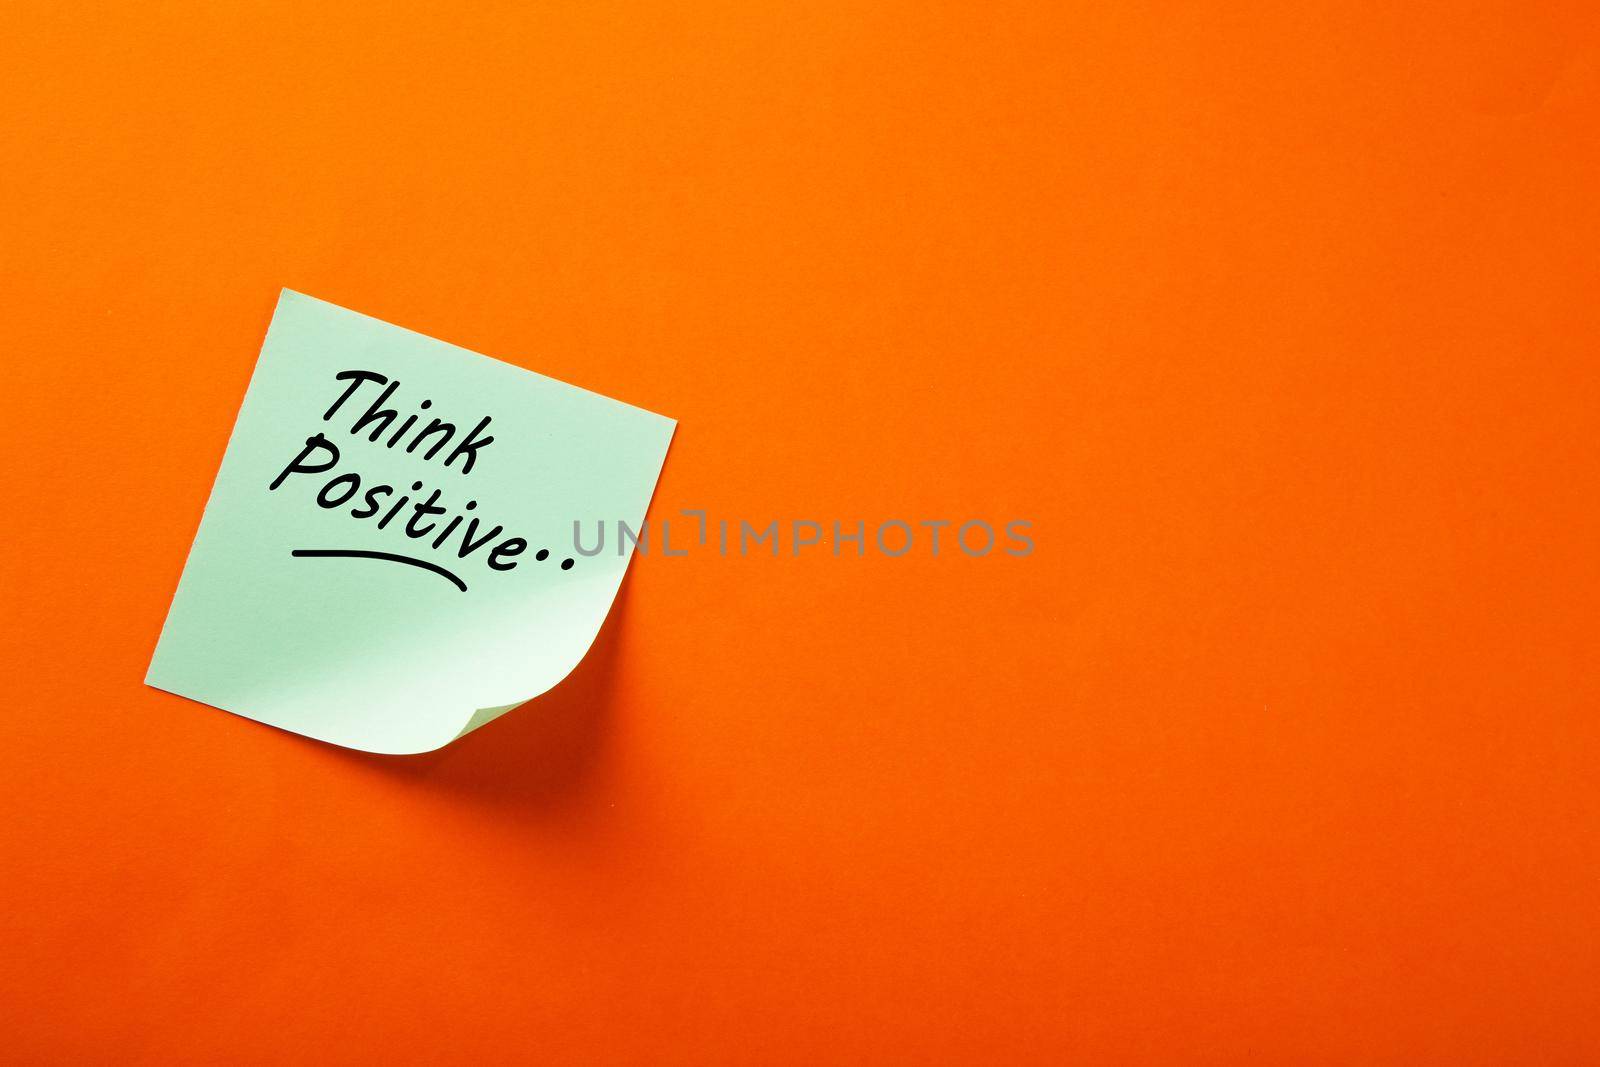 Motivational think positive word on note pads on orange background